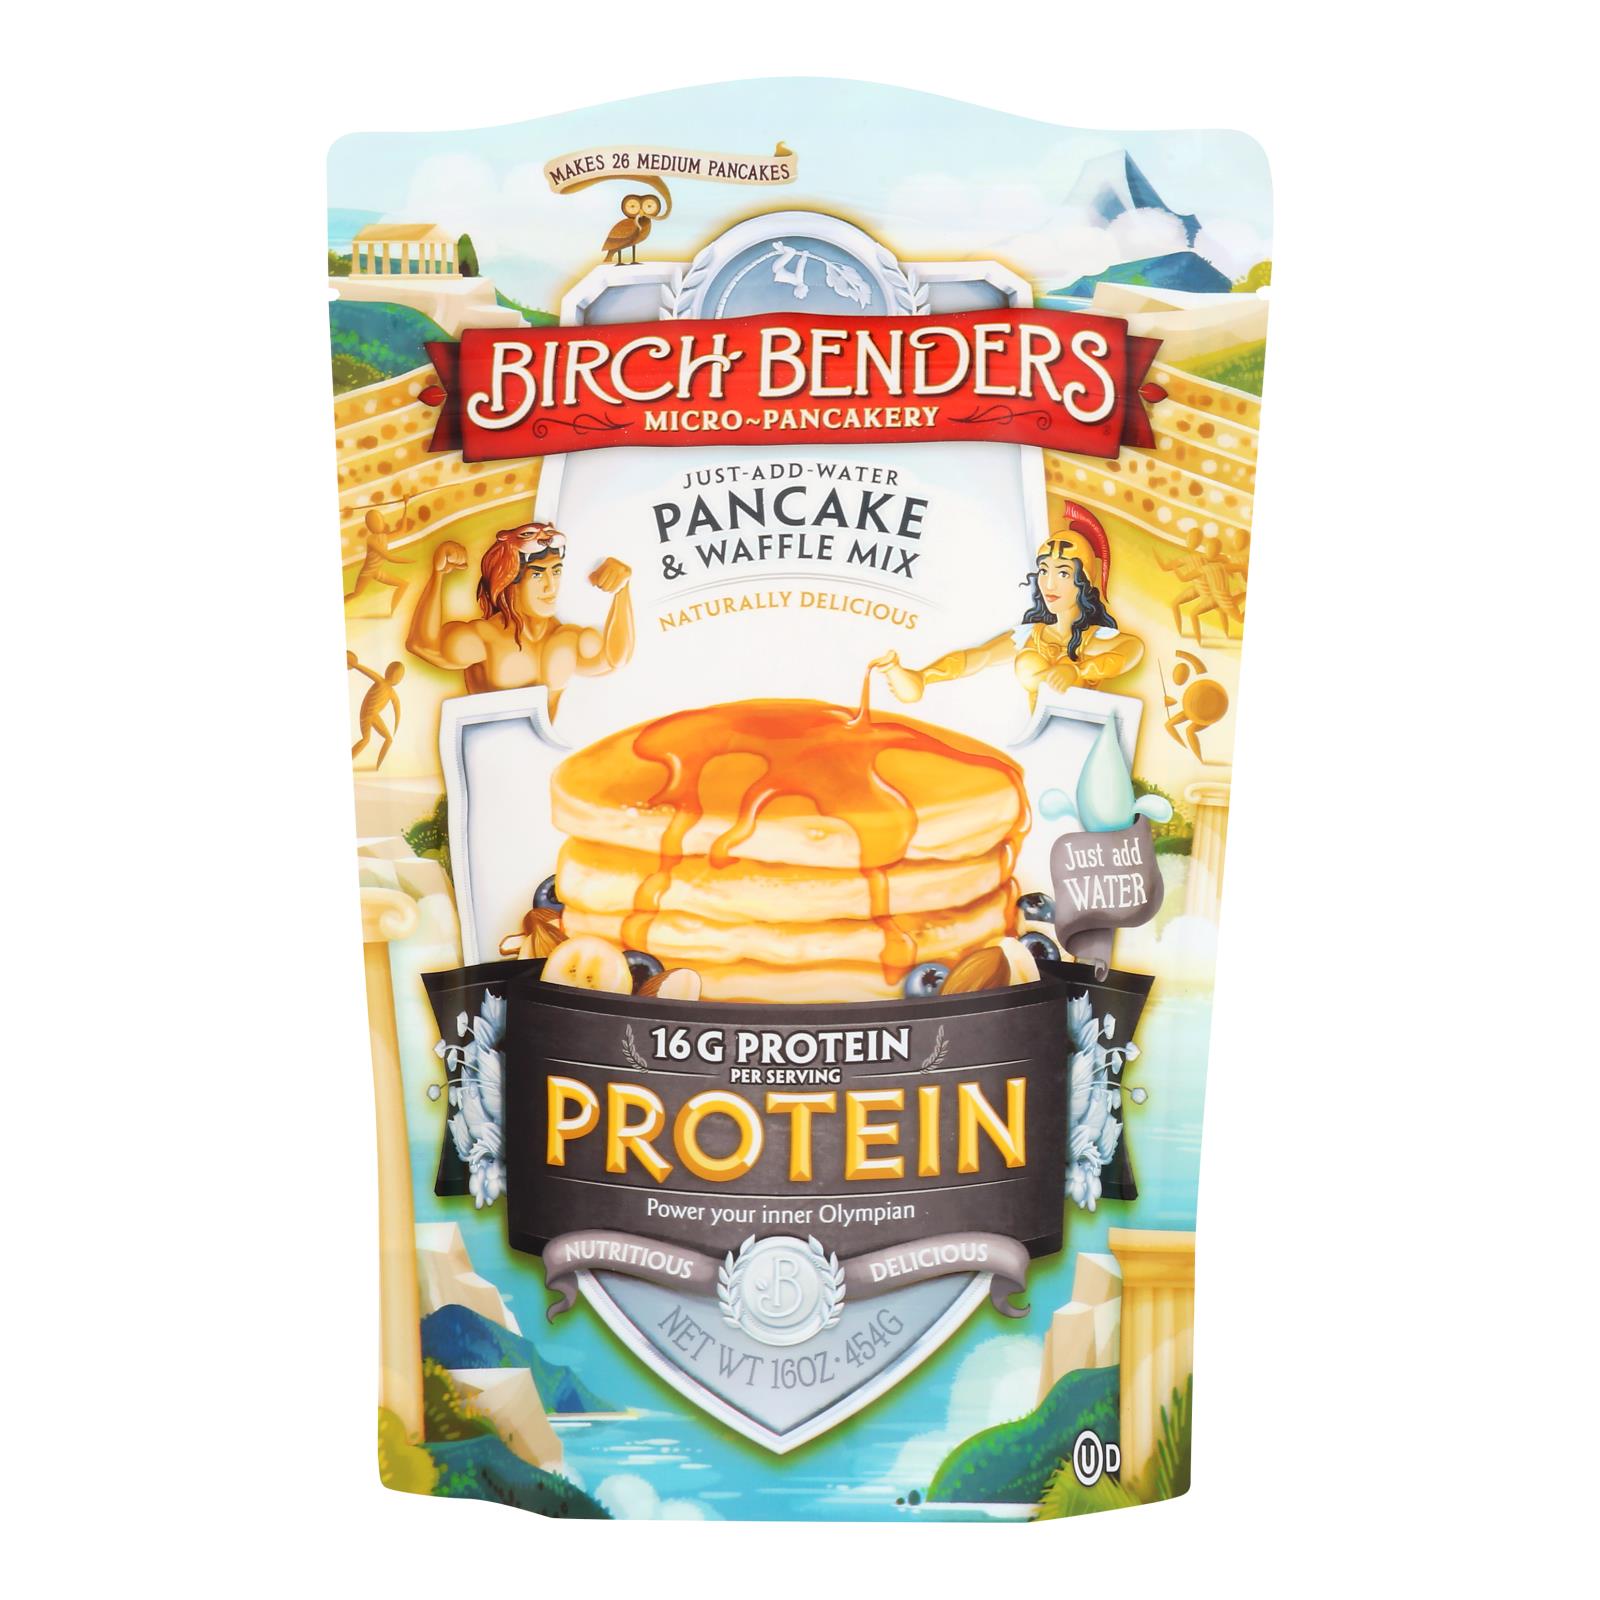 Birch Benders - Pancake And Waffle Mix - Protein - Case Of 6 - 16 Oz